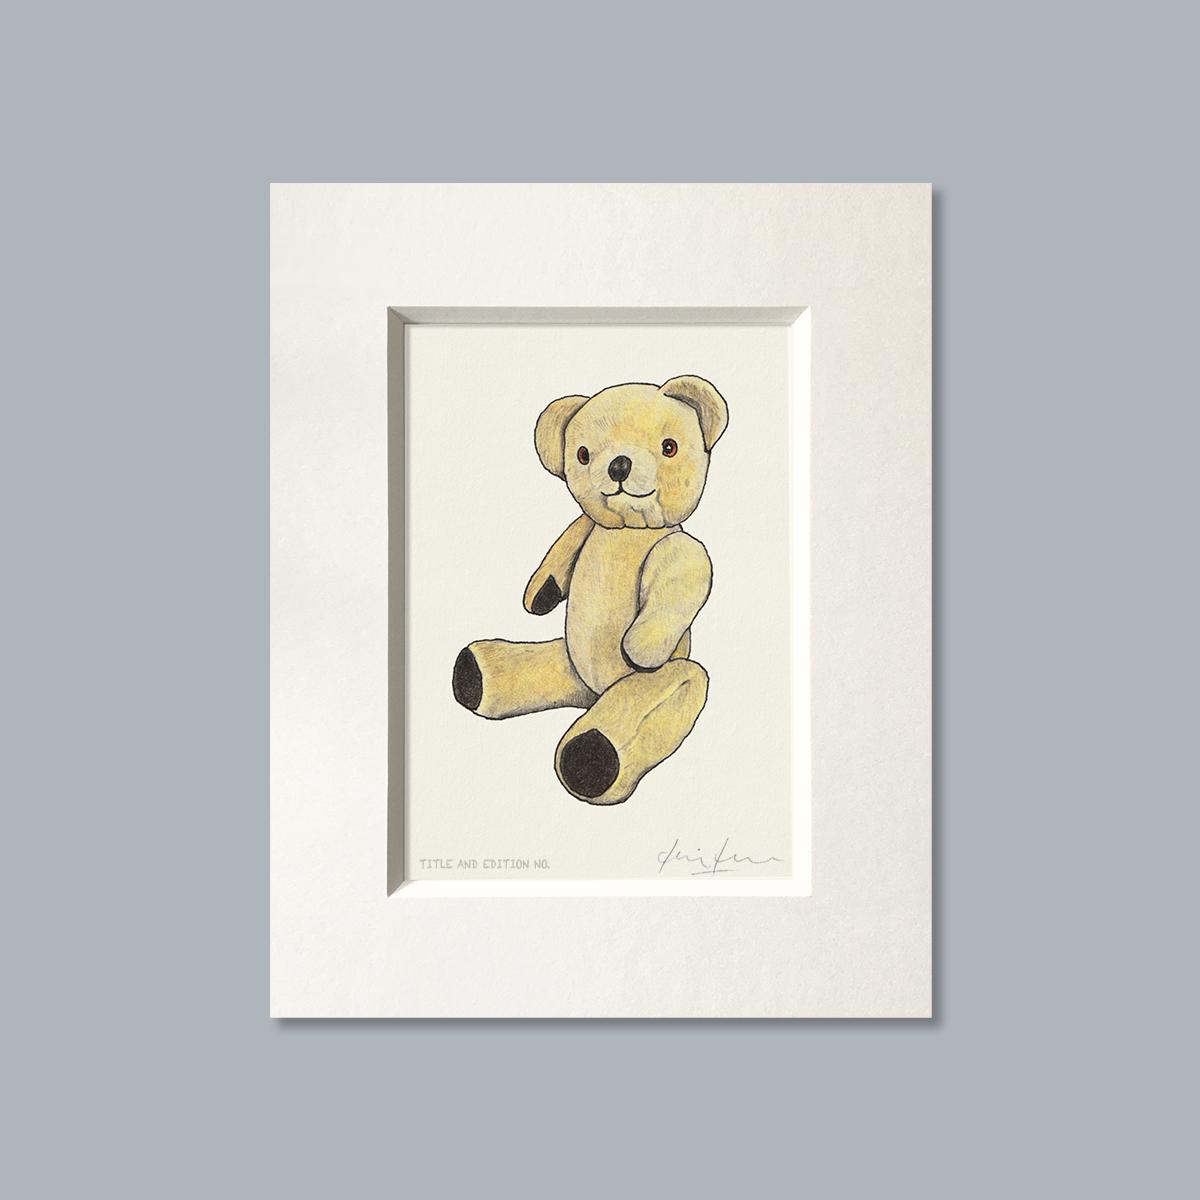 Limited edition print from a pen, ink and coloured pencil drawing of a Teddy Bear in a white mount